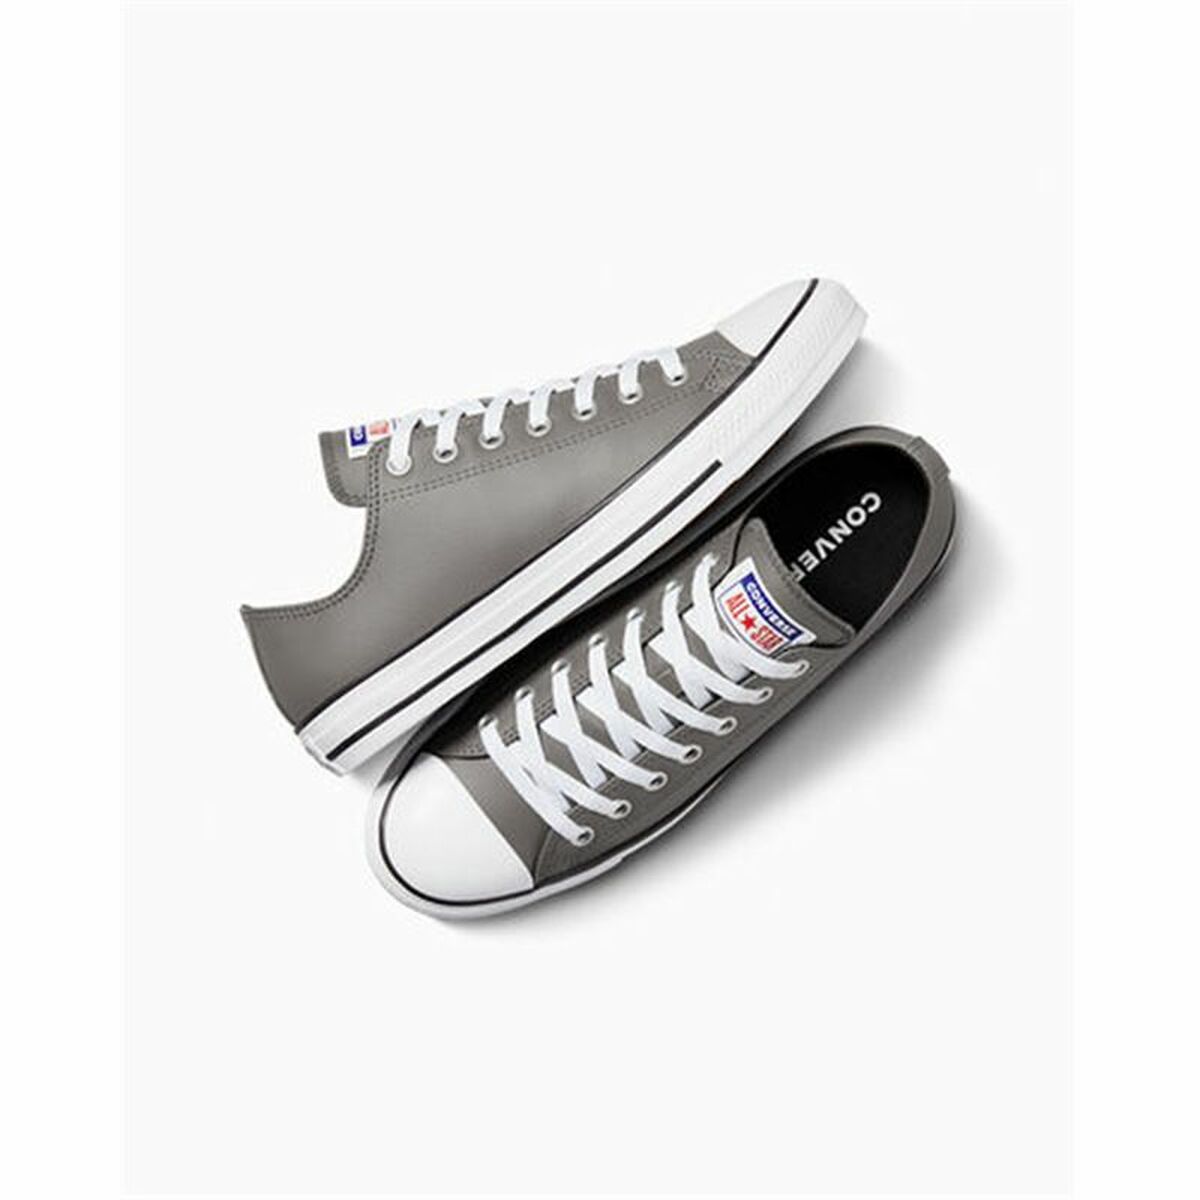 Chaussures casual femme Converse Chuck Taylor All Star Gris